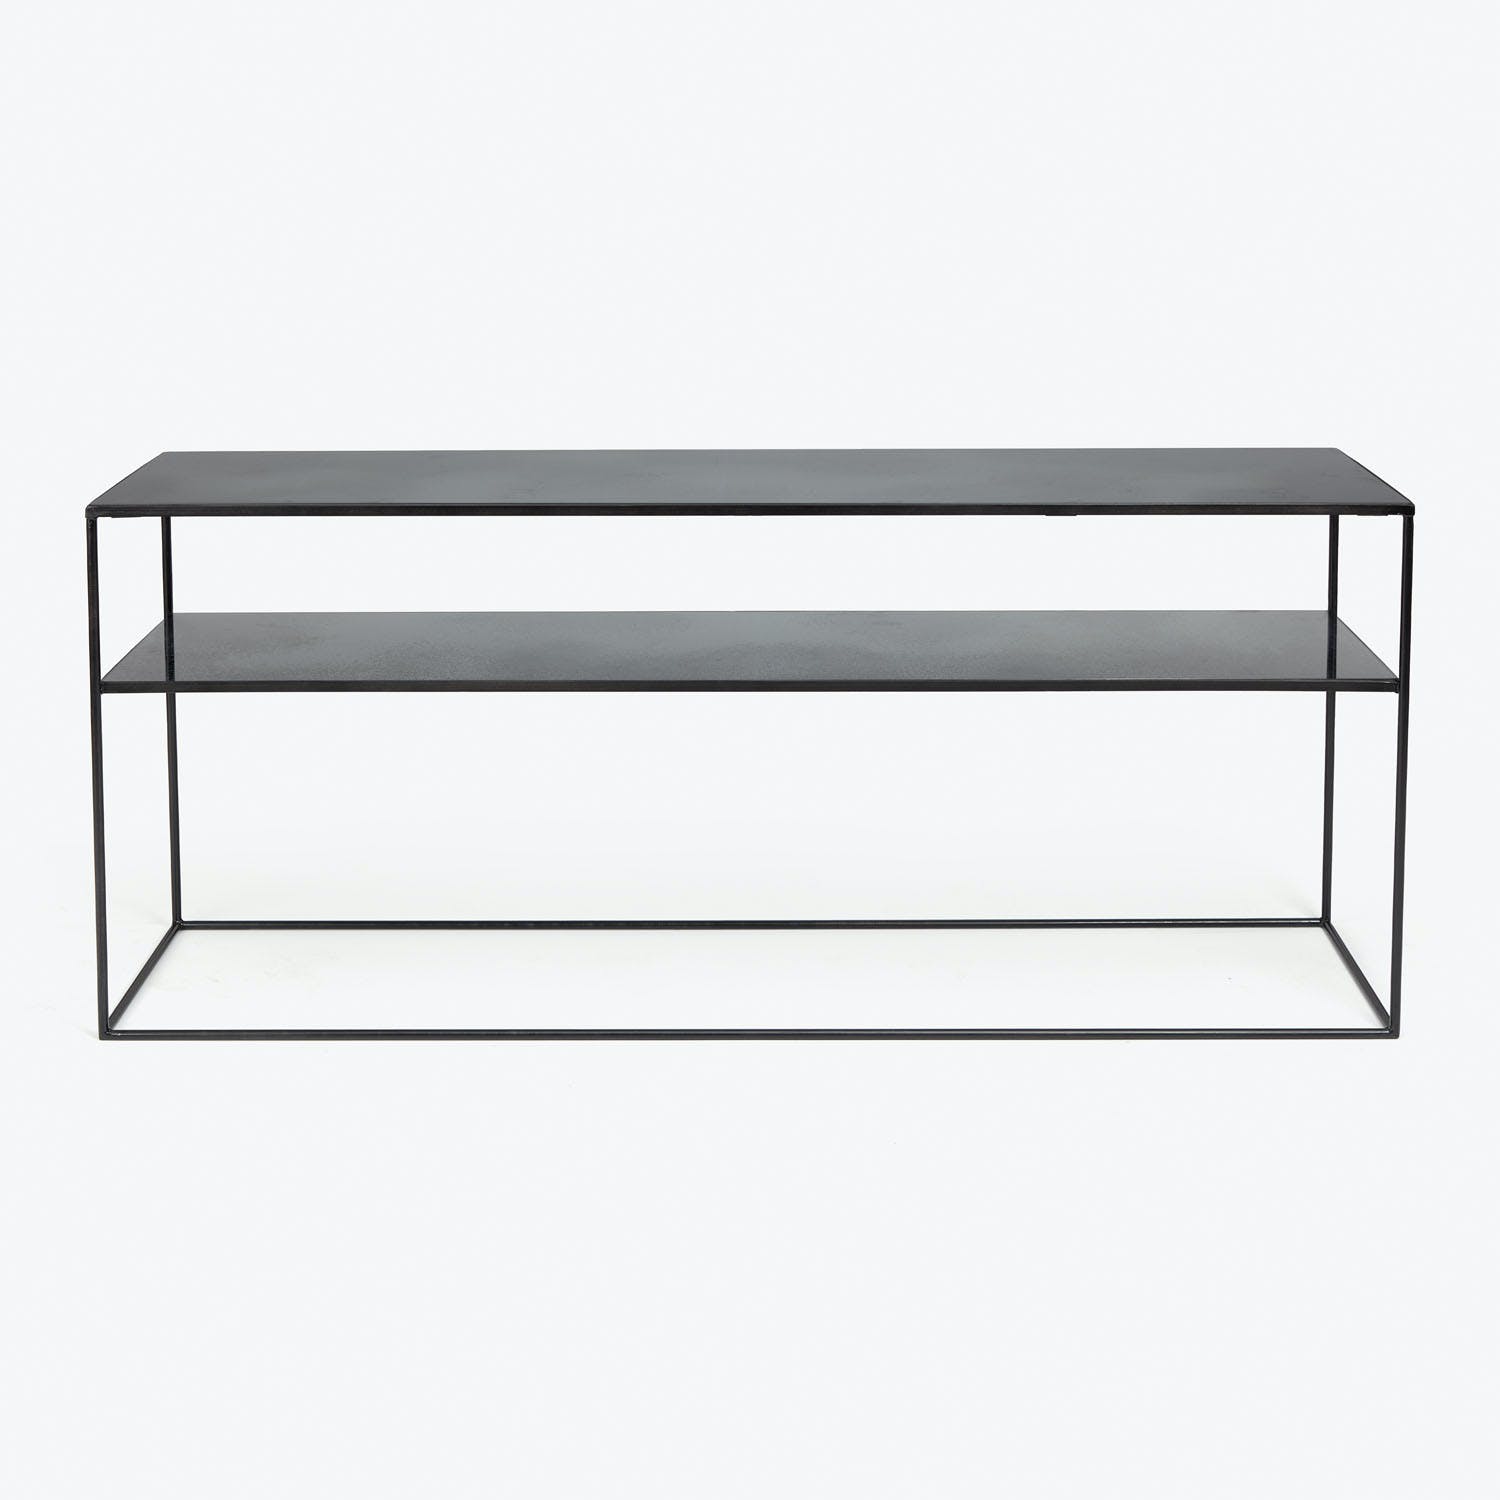 Modern black console table with minimalist design and two shelves.